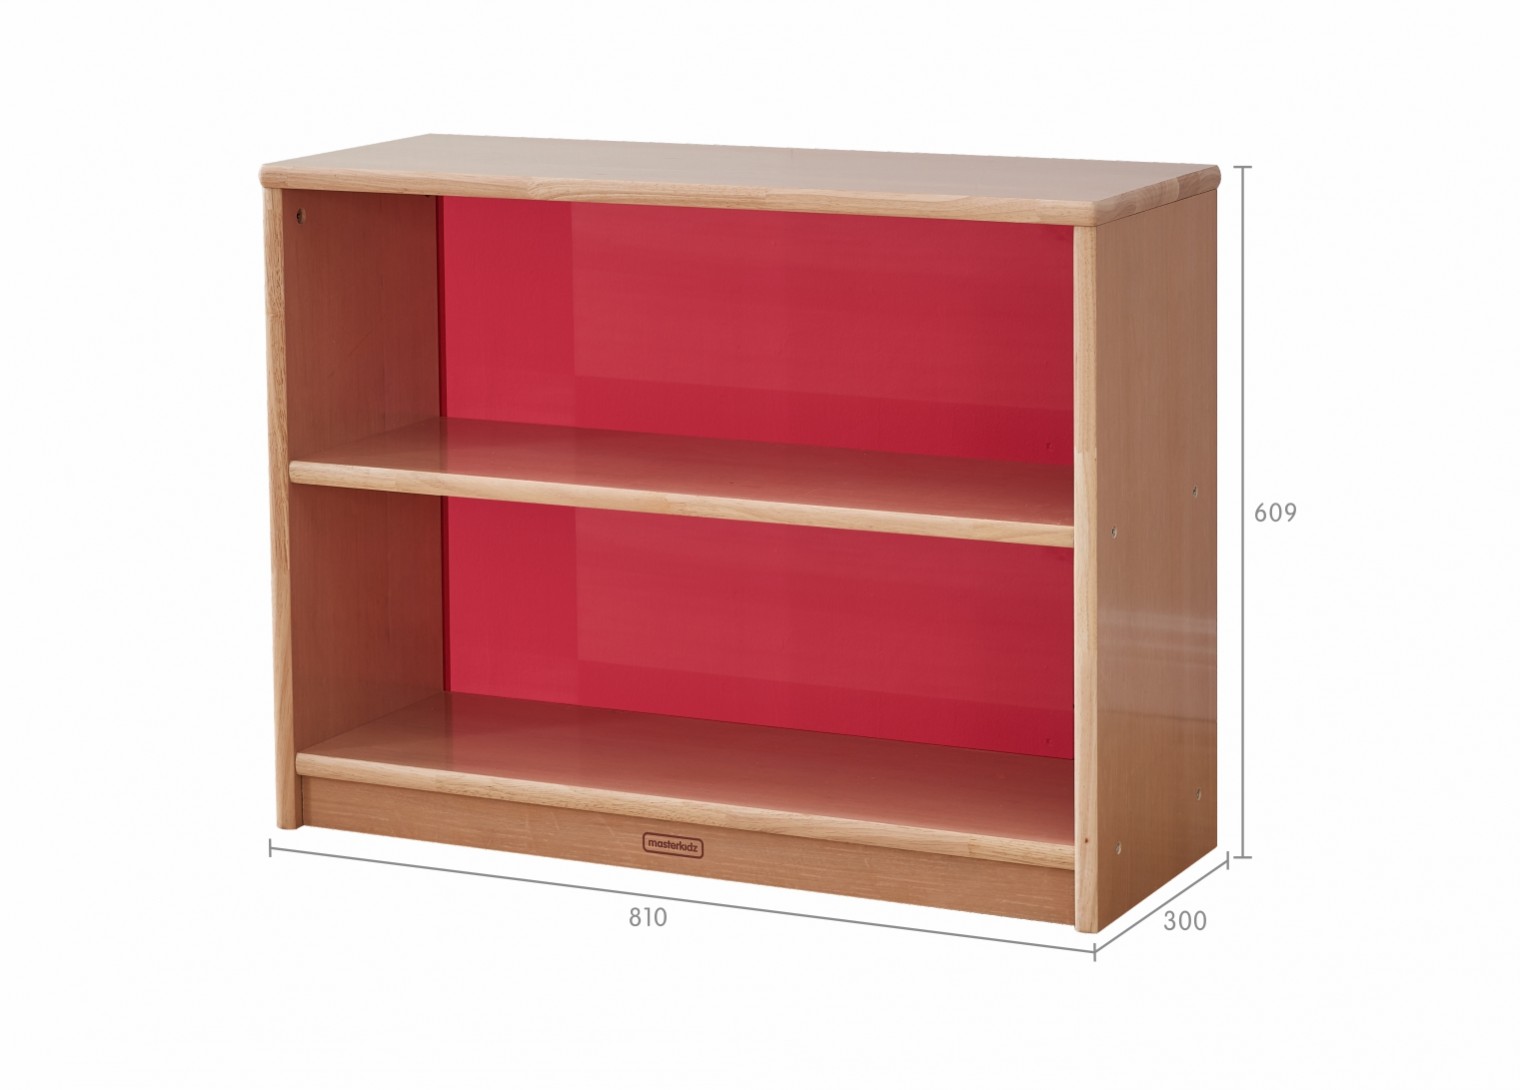 Forest School - 609H x 810L Wooden  Shelving Unit - Translucent Red Back